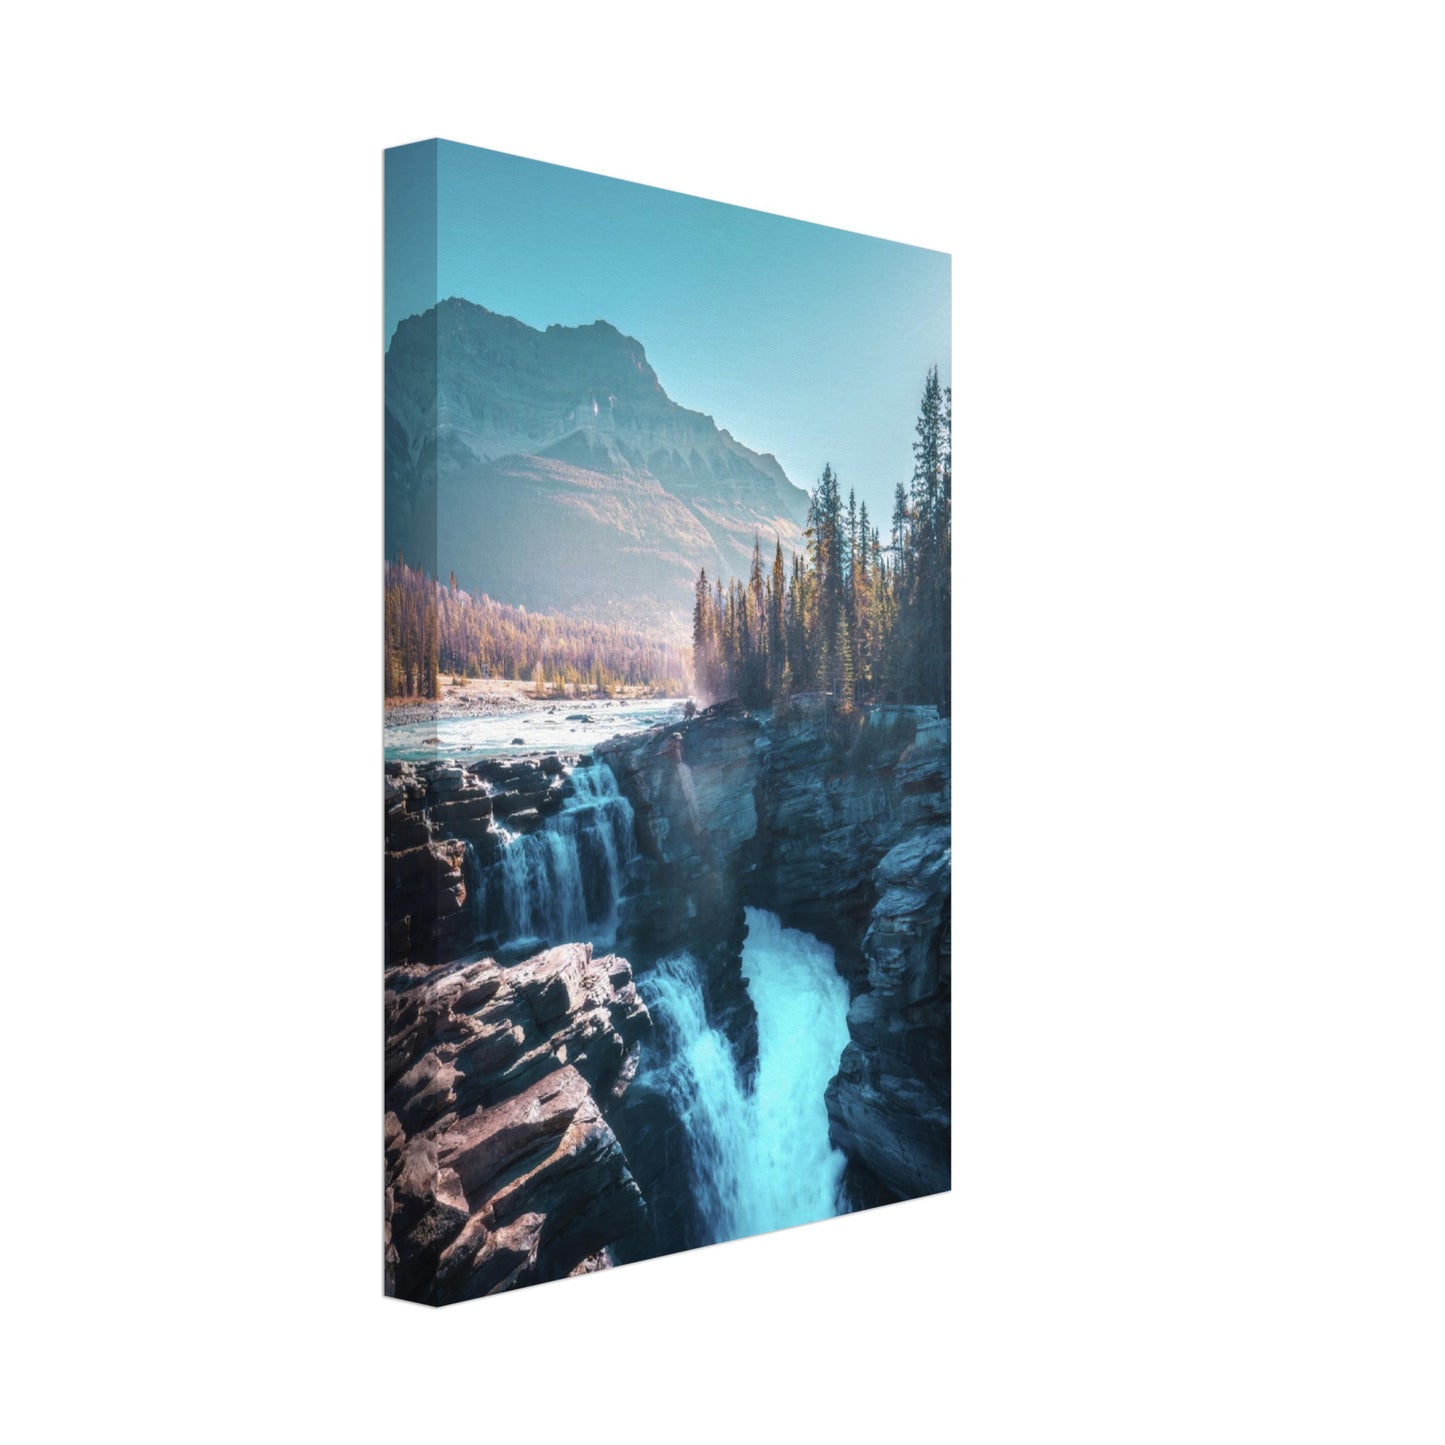 Don't Go chasing Waterfalls - Canvas